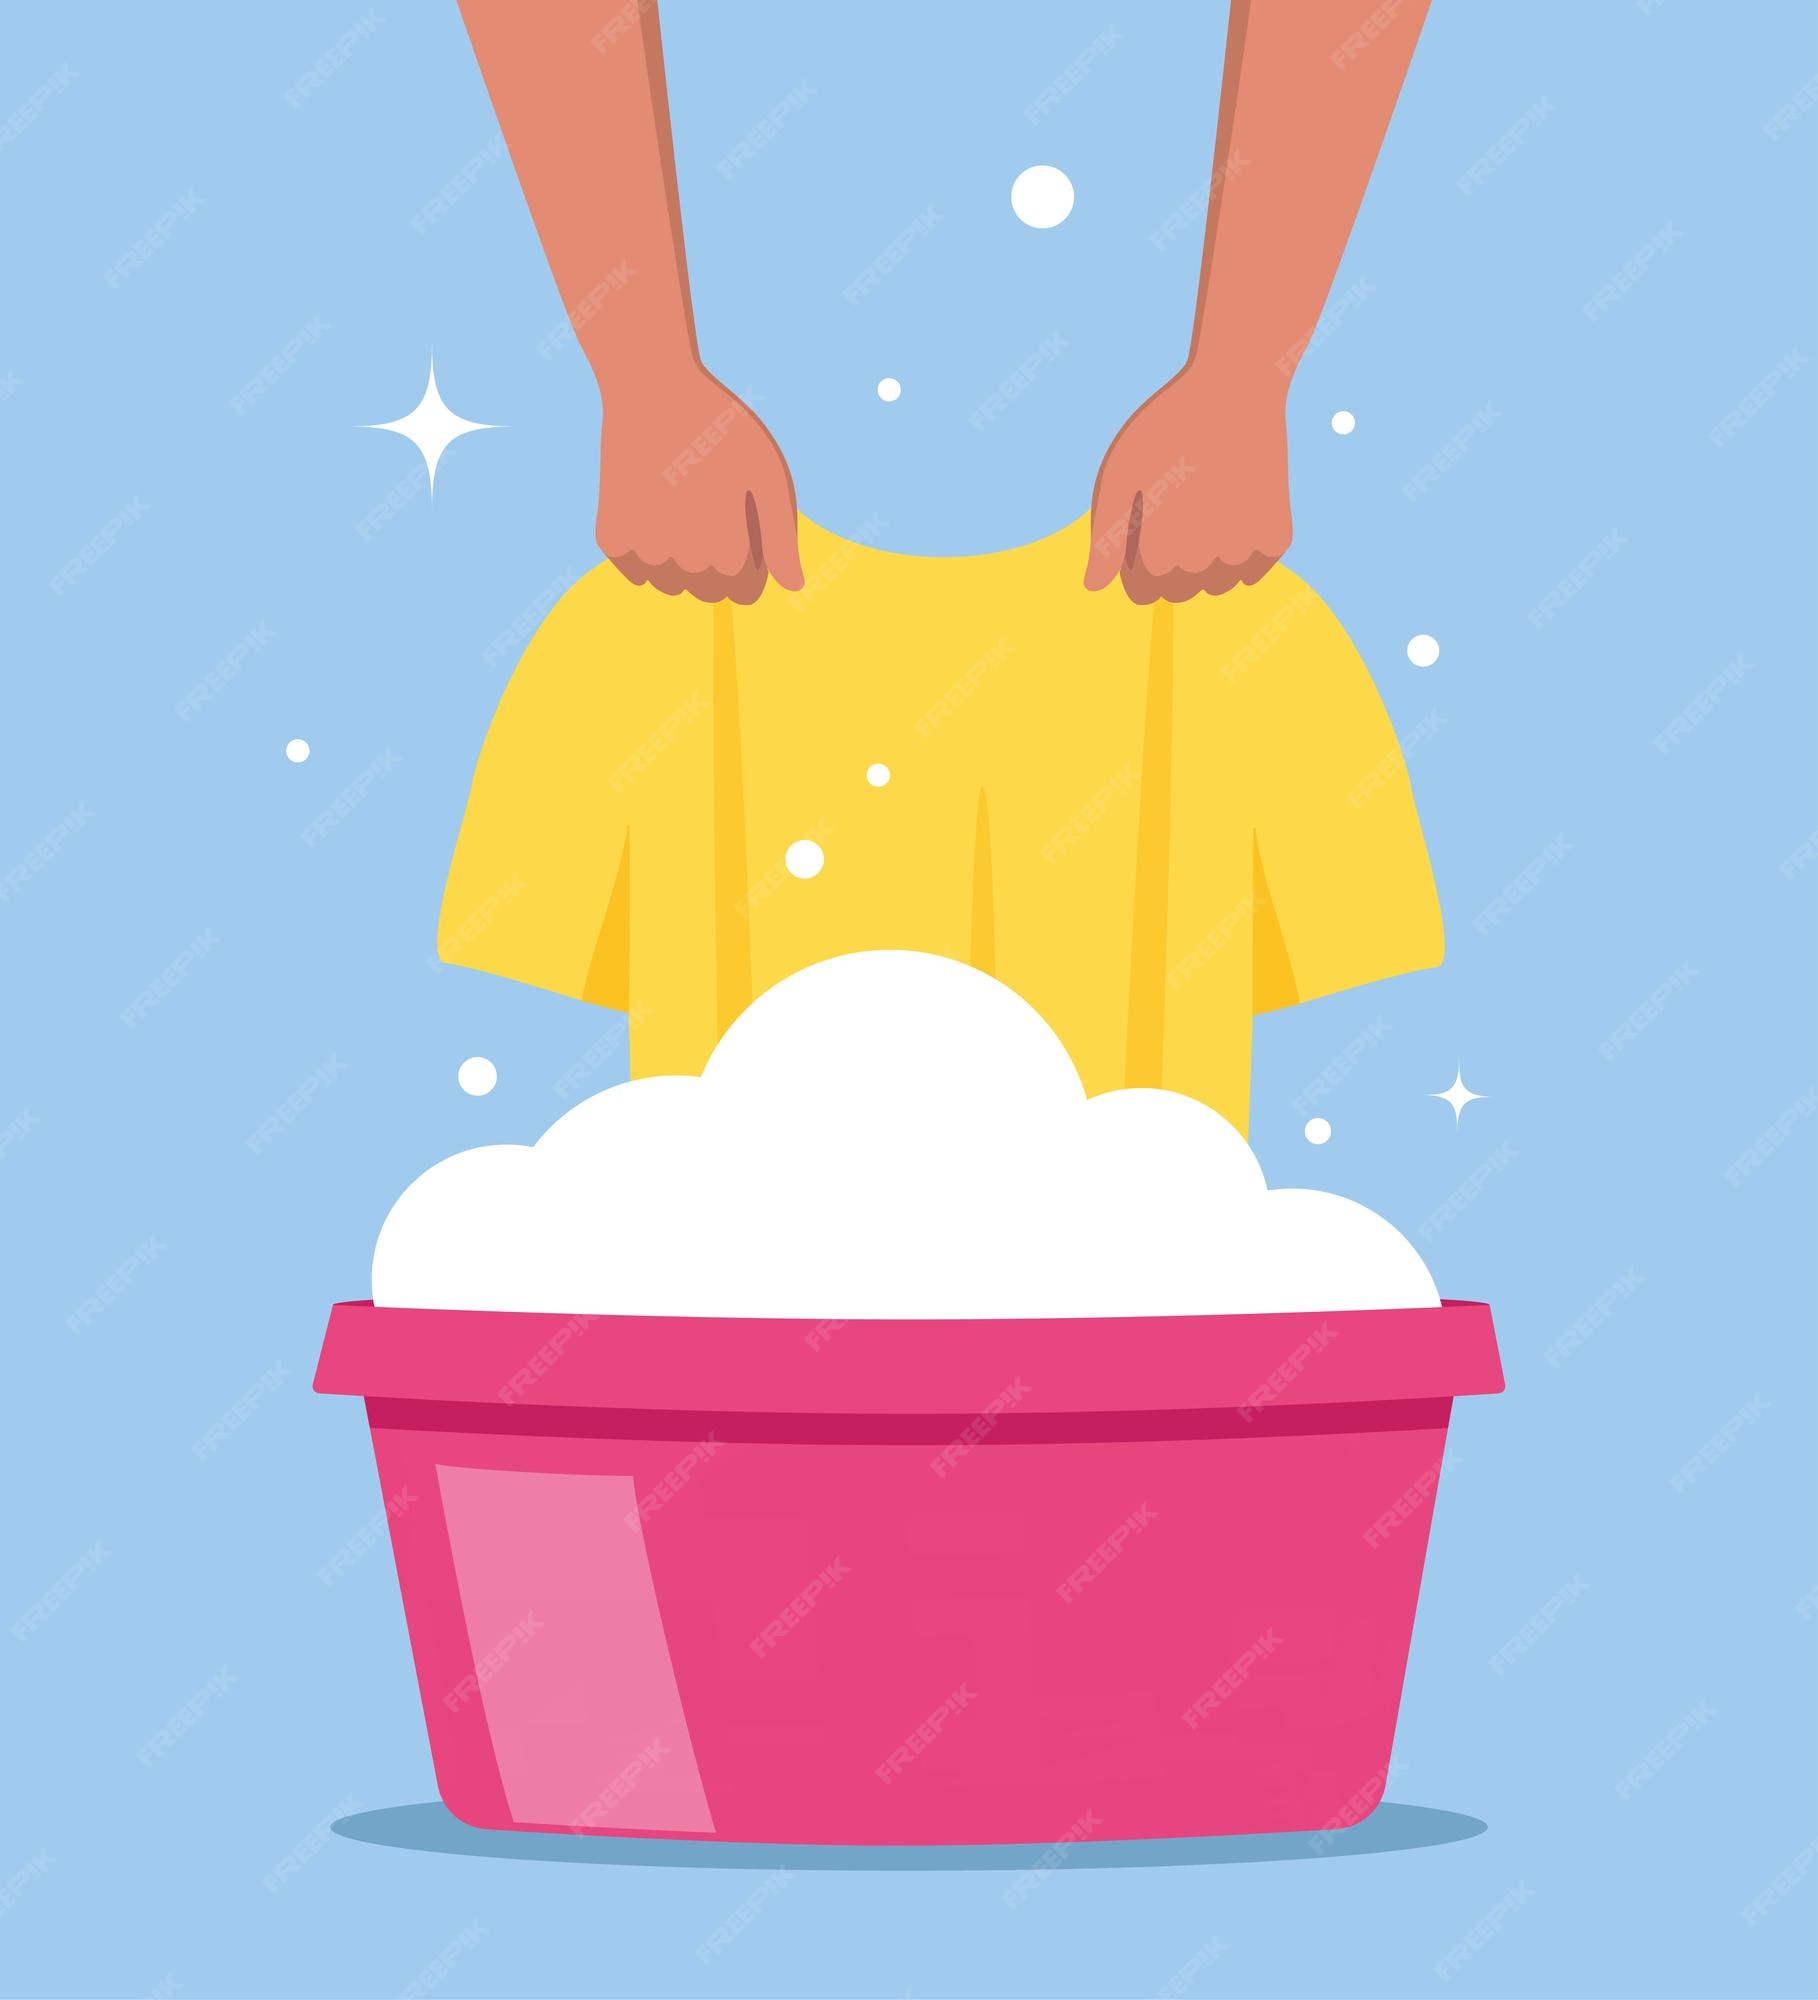 Page 2 | Laundry stain remover Vectors & Illustrations for Free Download | Freepik